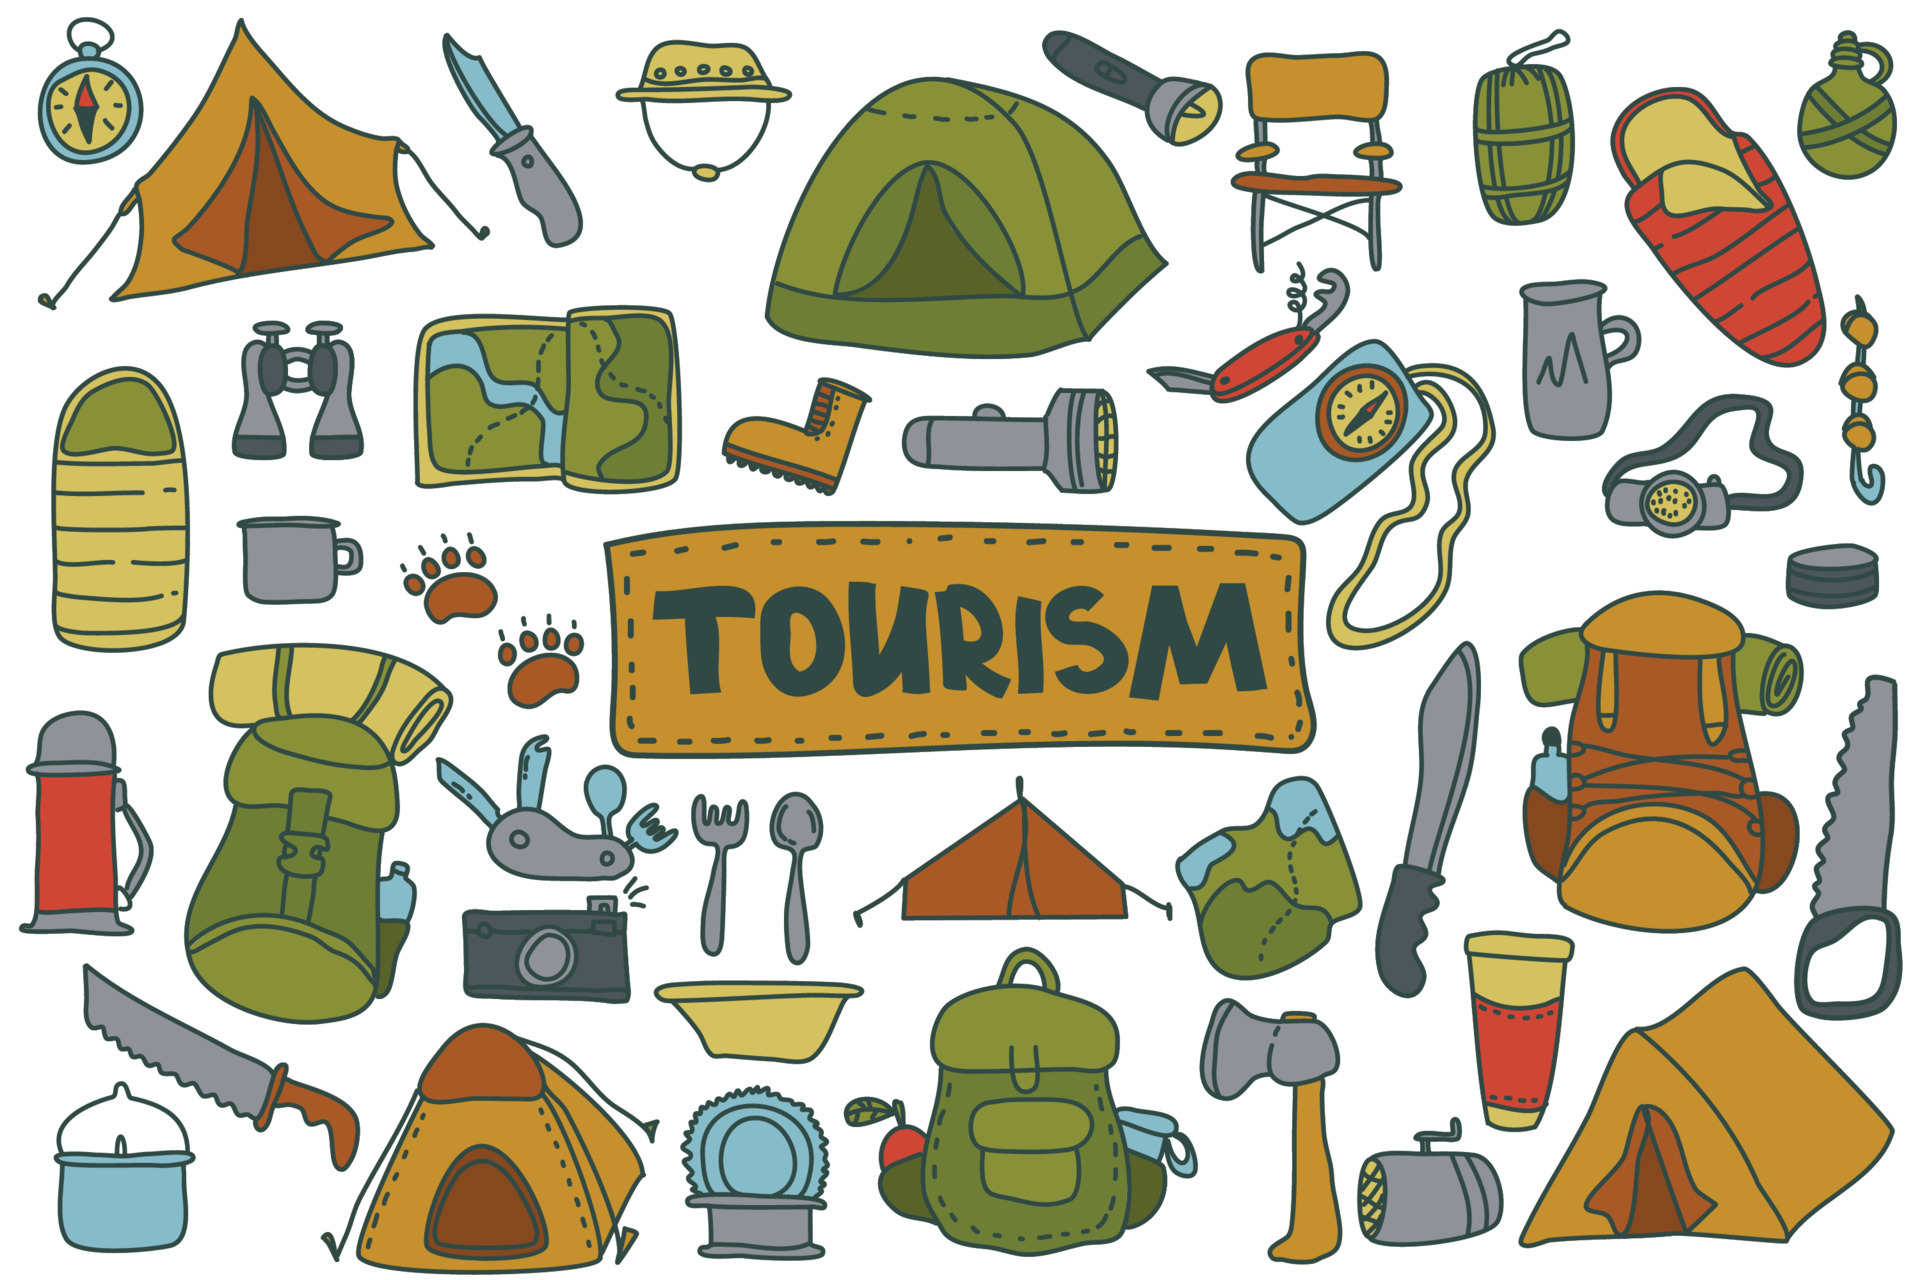 https://static.vecteezy.com/system/resources/previews/005/387/002/original/tourism-camping-vacation-set-in-doodle-style-camping-and-hiking-equipment-clip-art-set-nature-forest-recreation-sport-vector.jpg